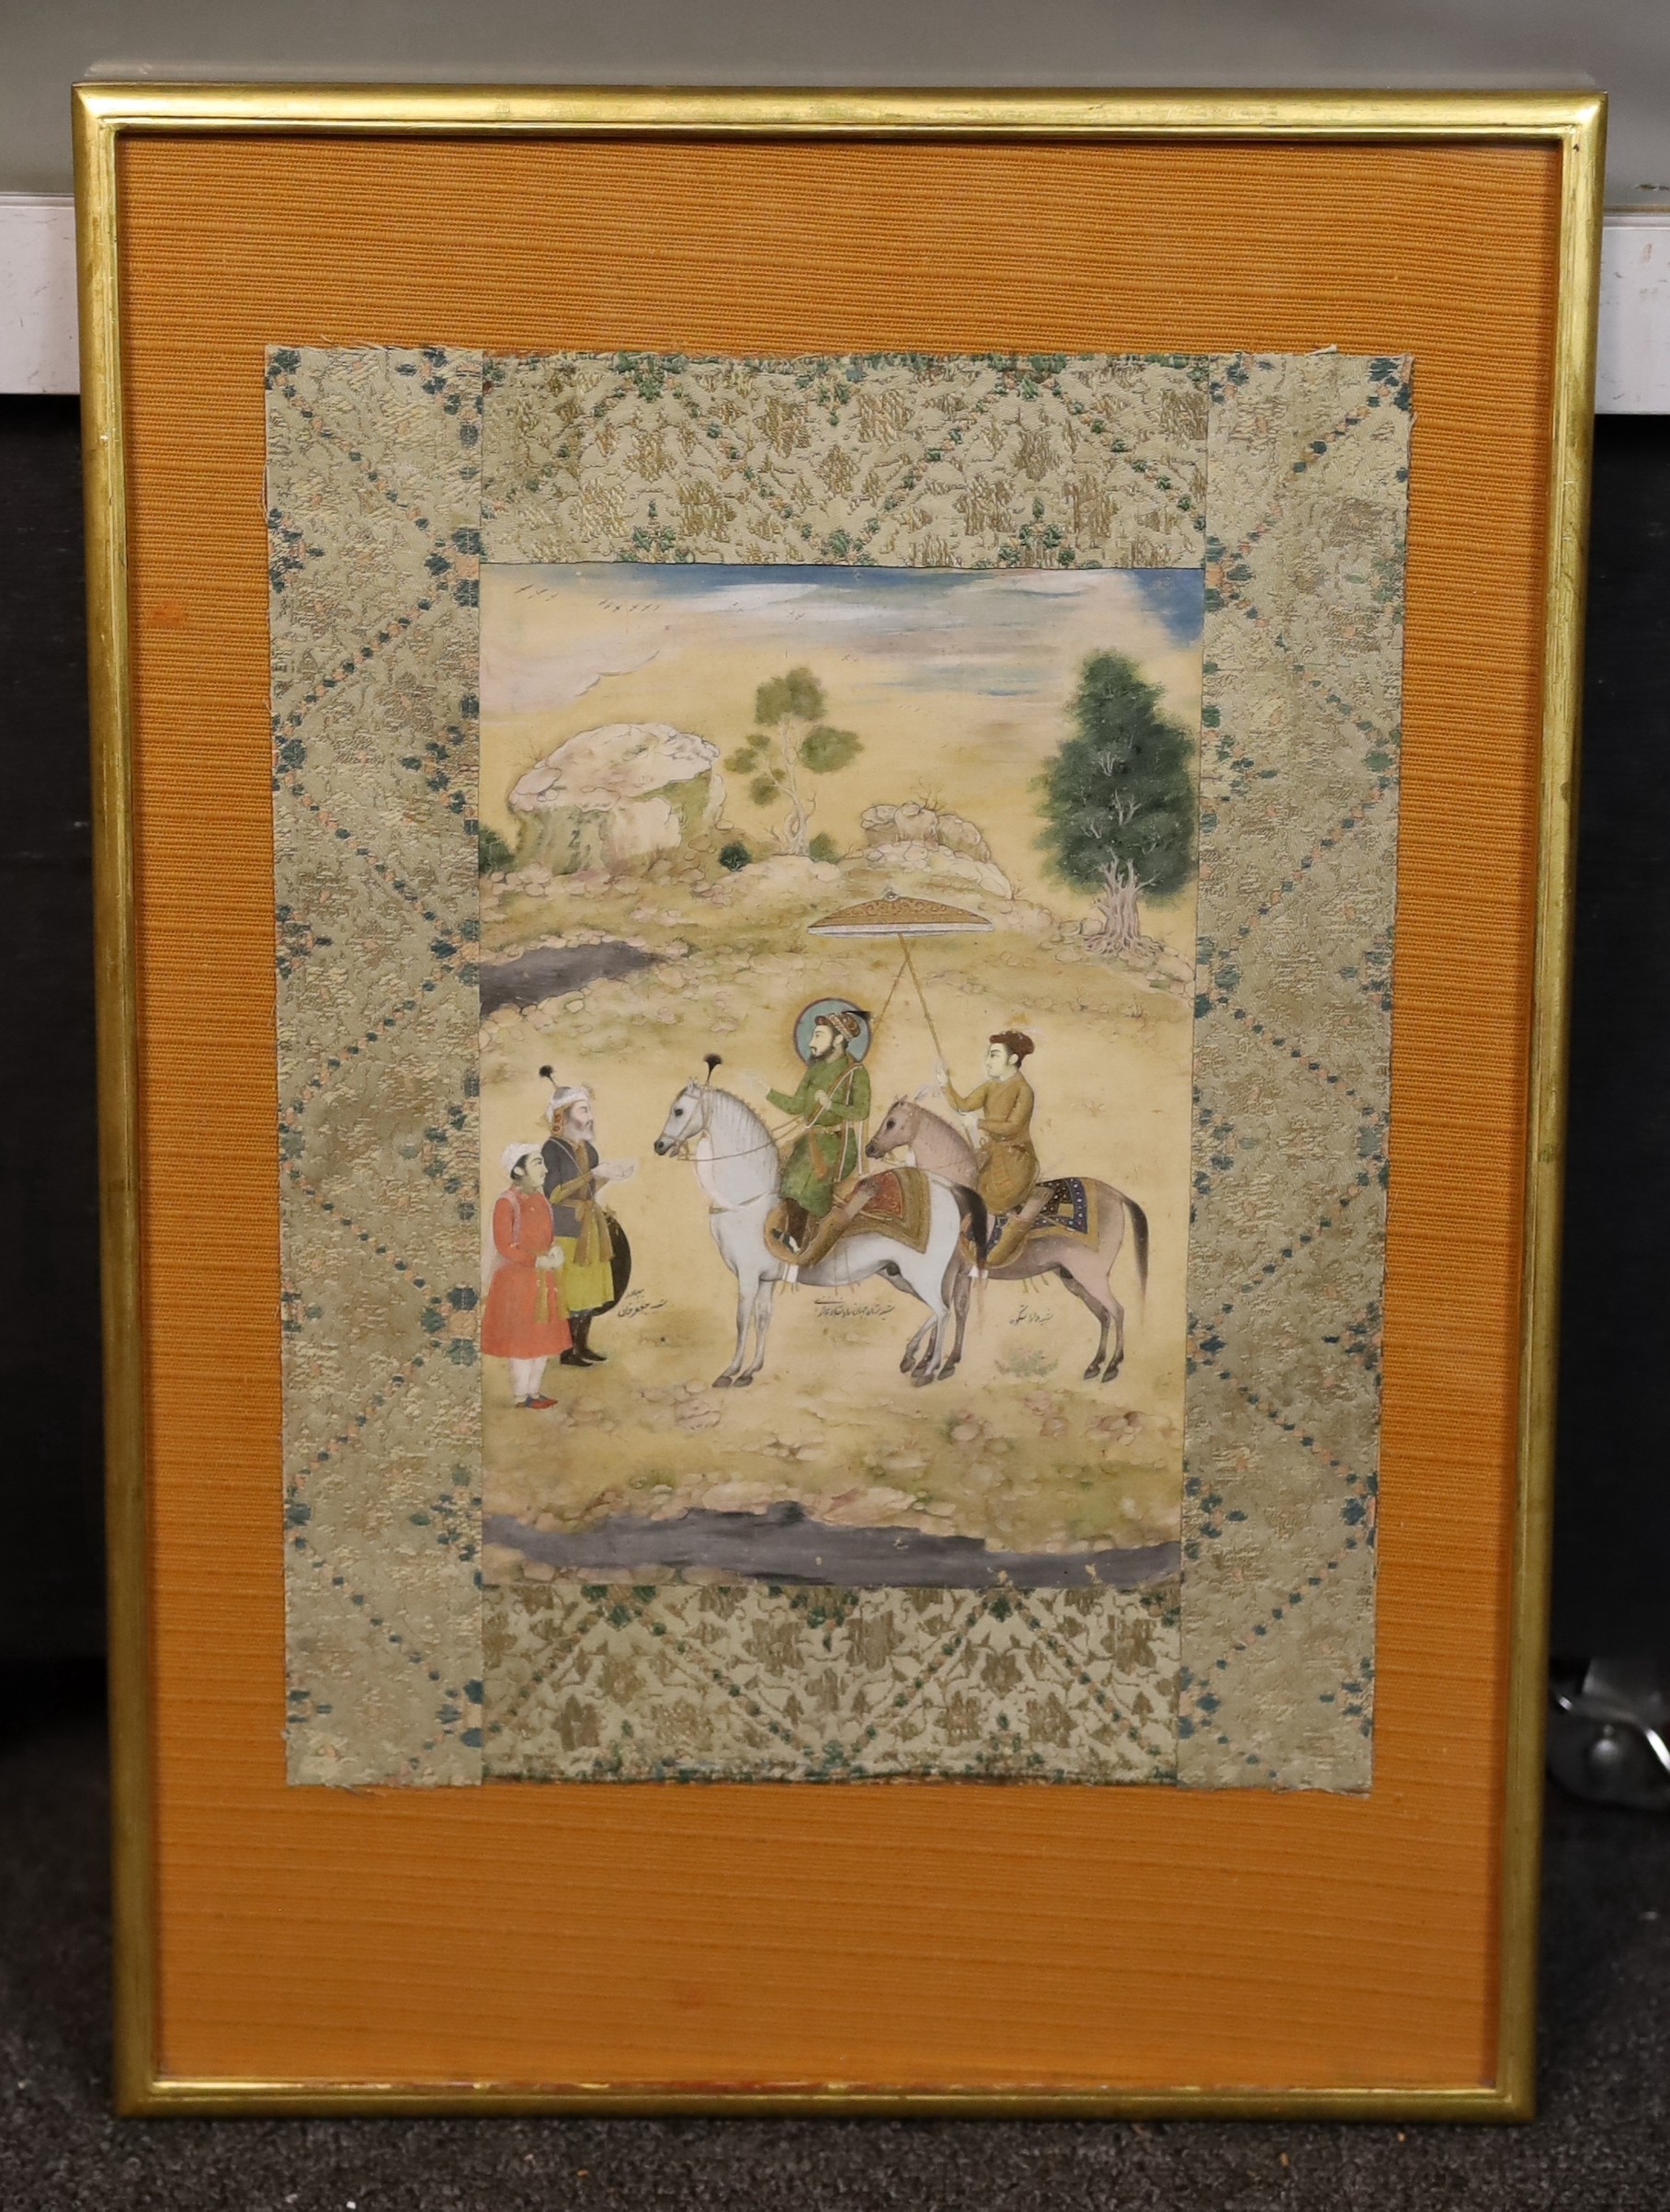 Indian School (early 19th century) , Shah Jahan and Prince Dara Shikoh on horseback speaking to his Grand vezier Jafar Khan, watercolour with gilding on paper, 22 x 15cm